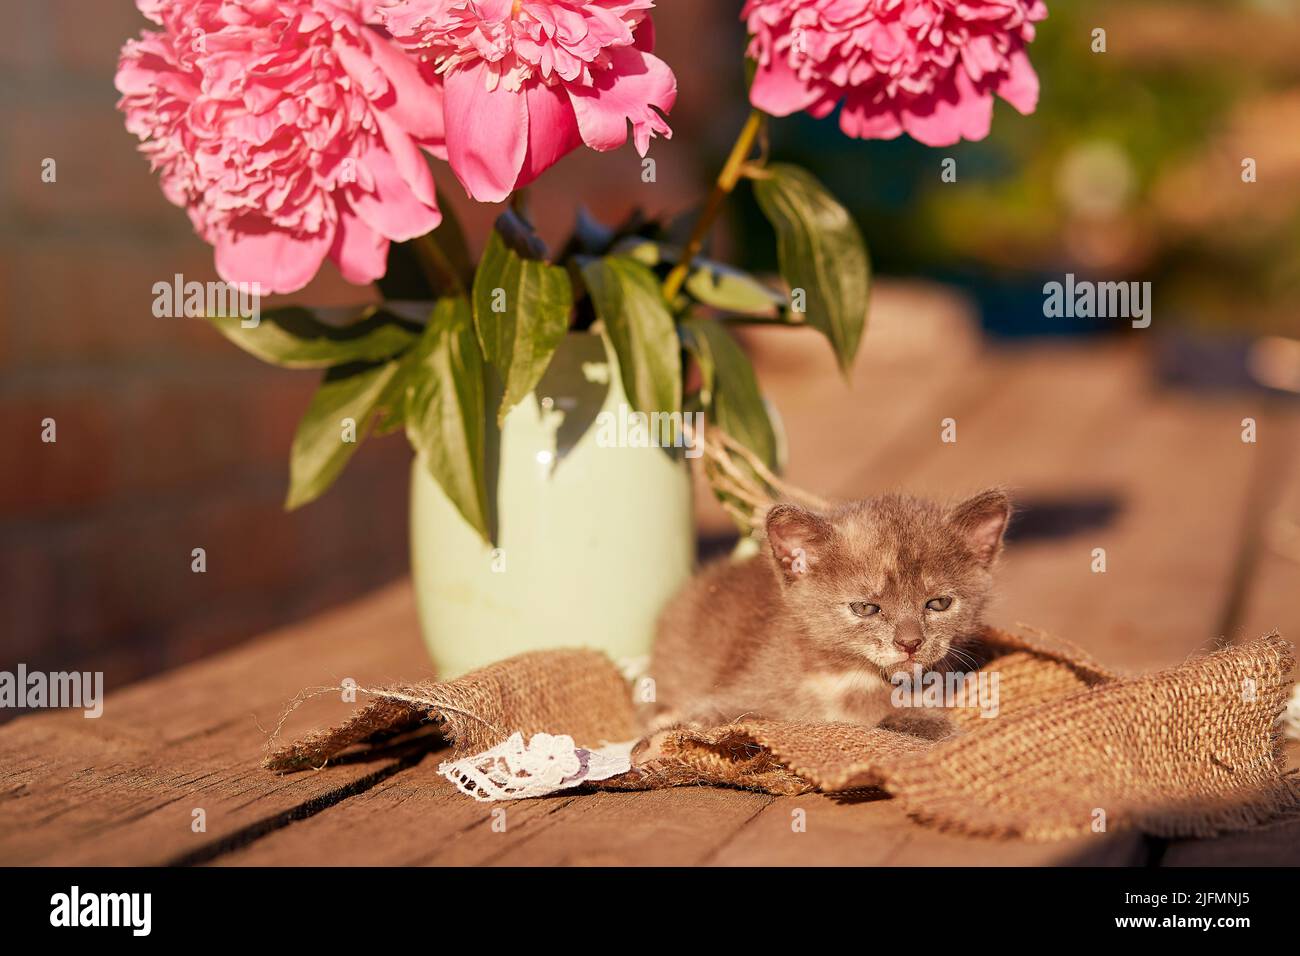 Cute animals - domestic kittens among blooming peony. Summer aesthetic background. Adorable small animal at summertime. Discovery and curiosity childhood. Stock Photo